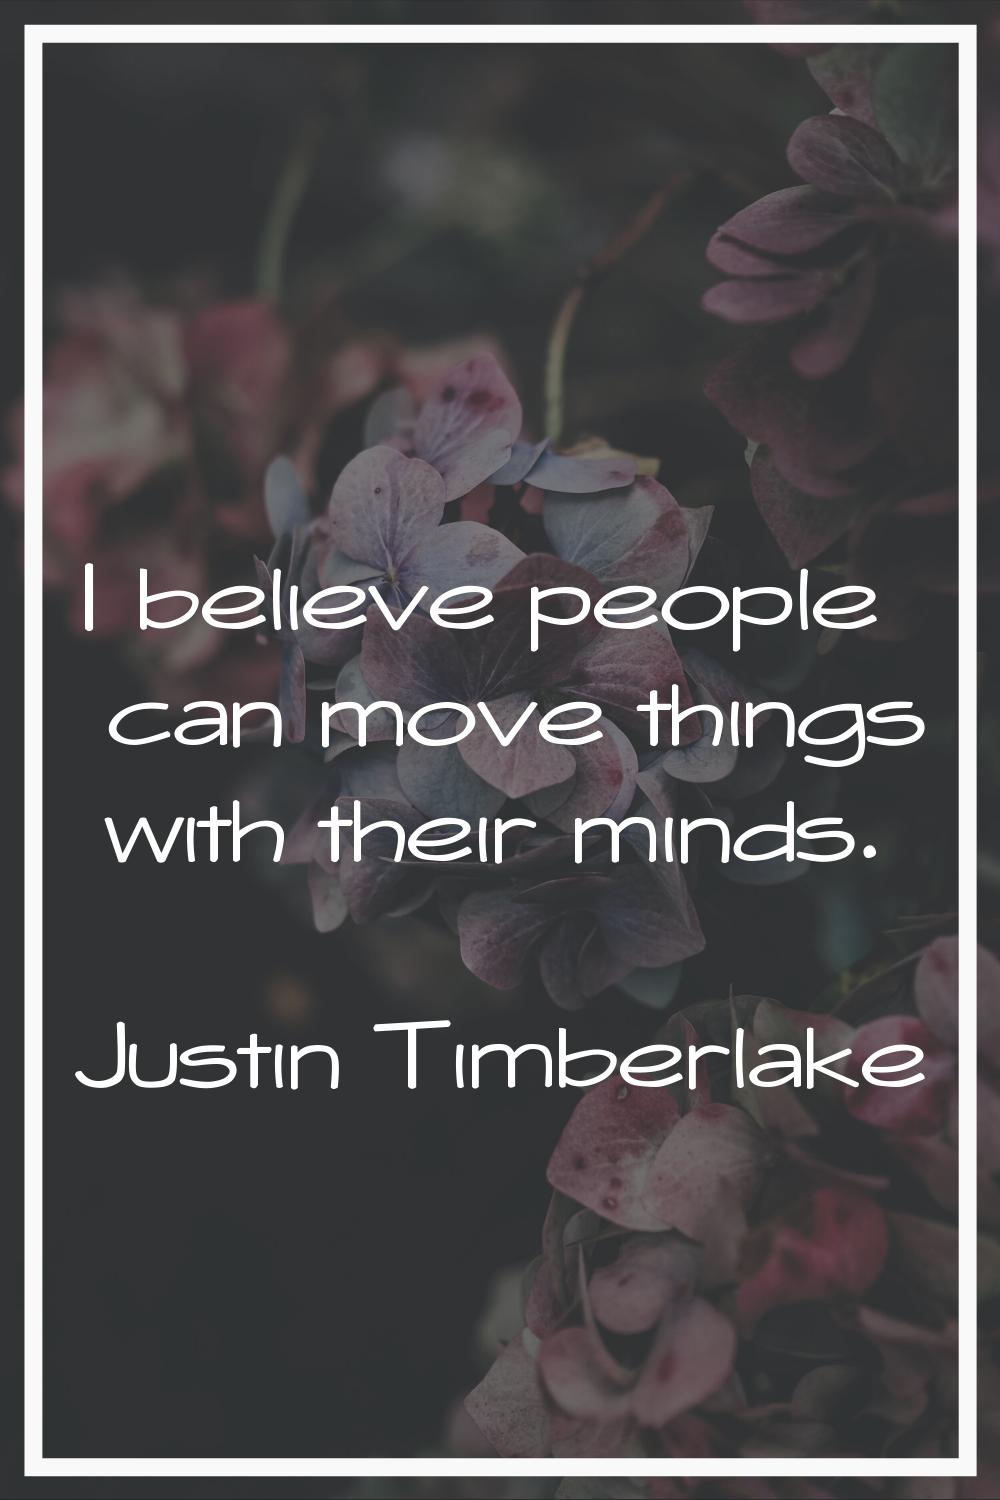 I believe people can move things with their minds.